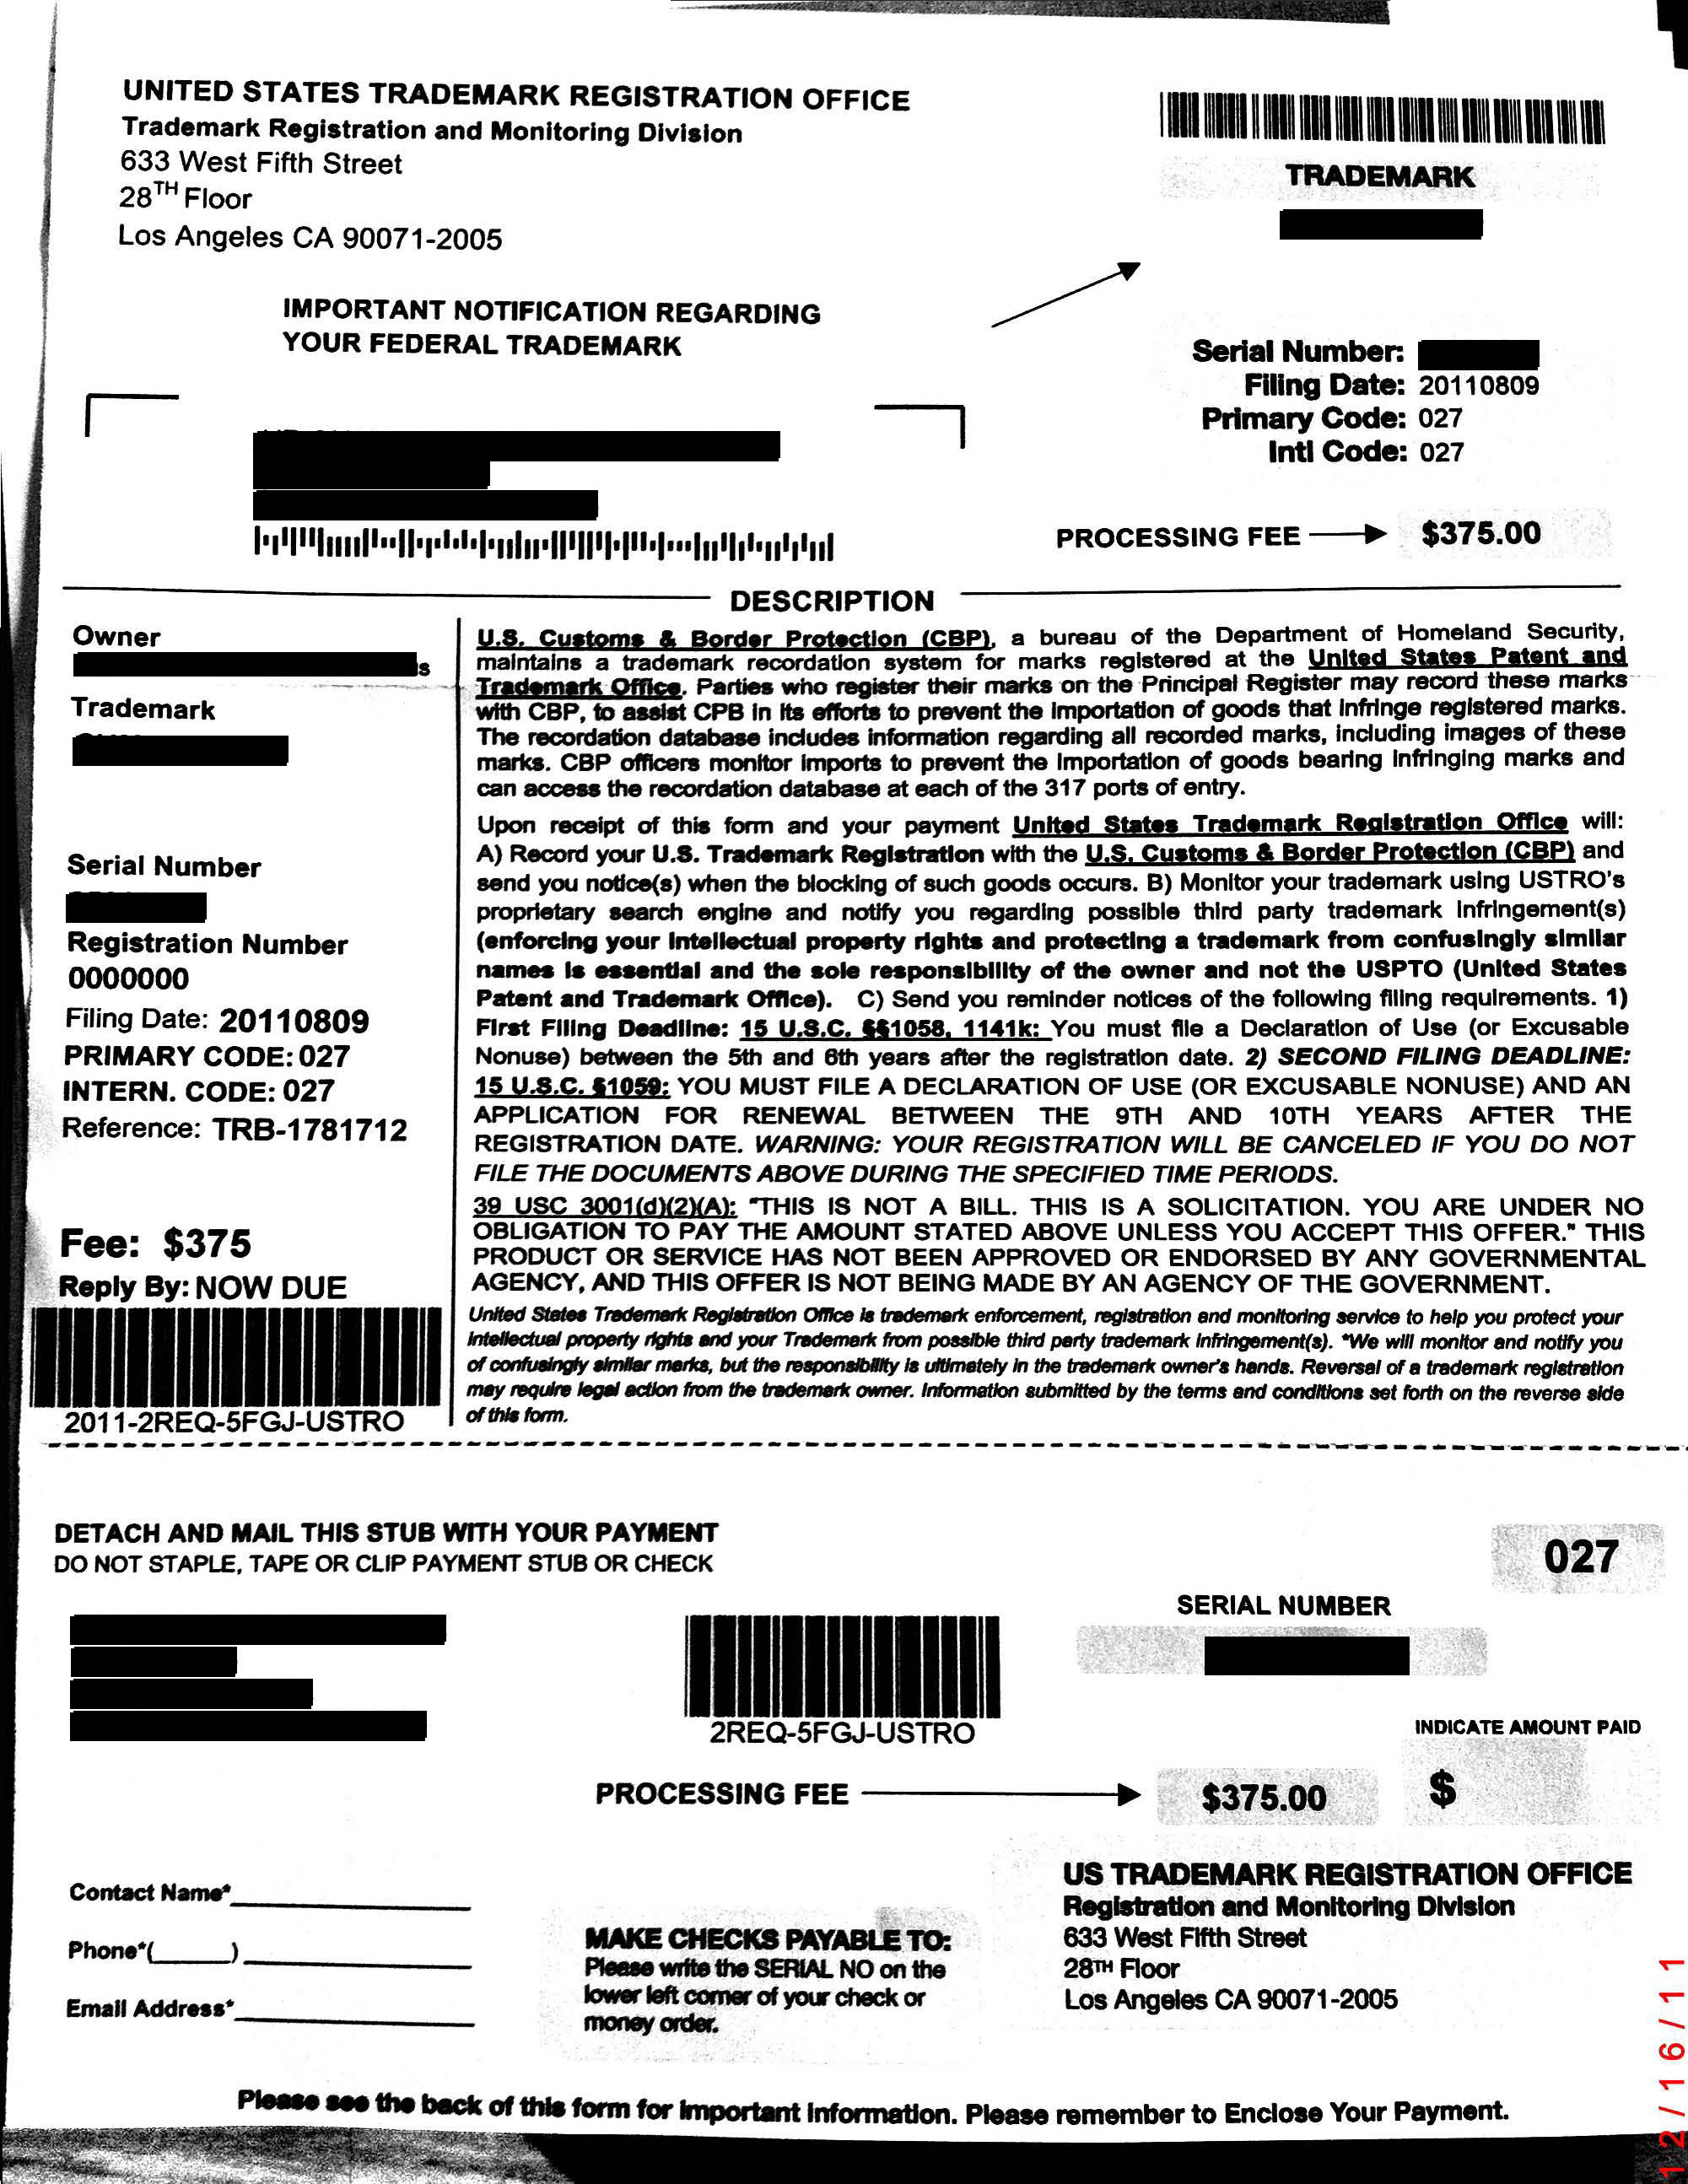 Copy of solicitation from UNITED STATES TRADEMARK REGISTRATION OFFICE